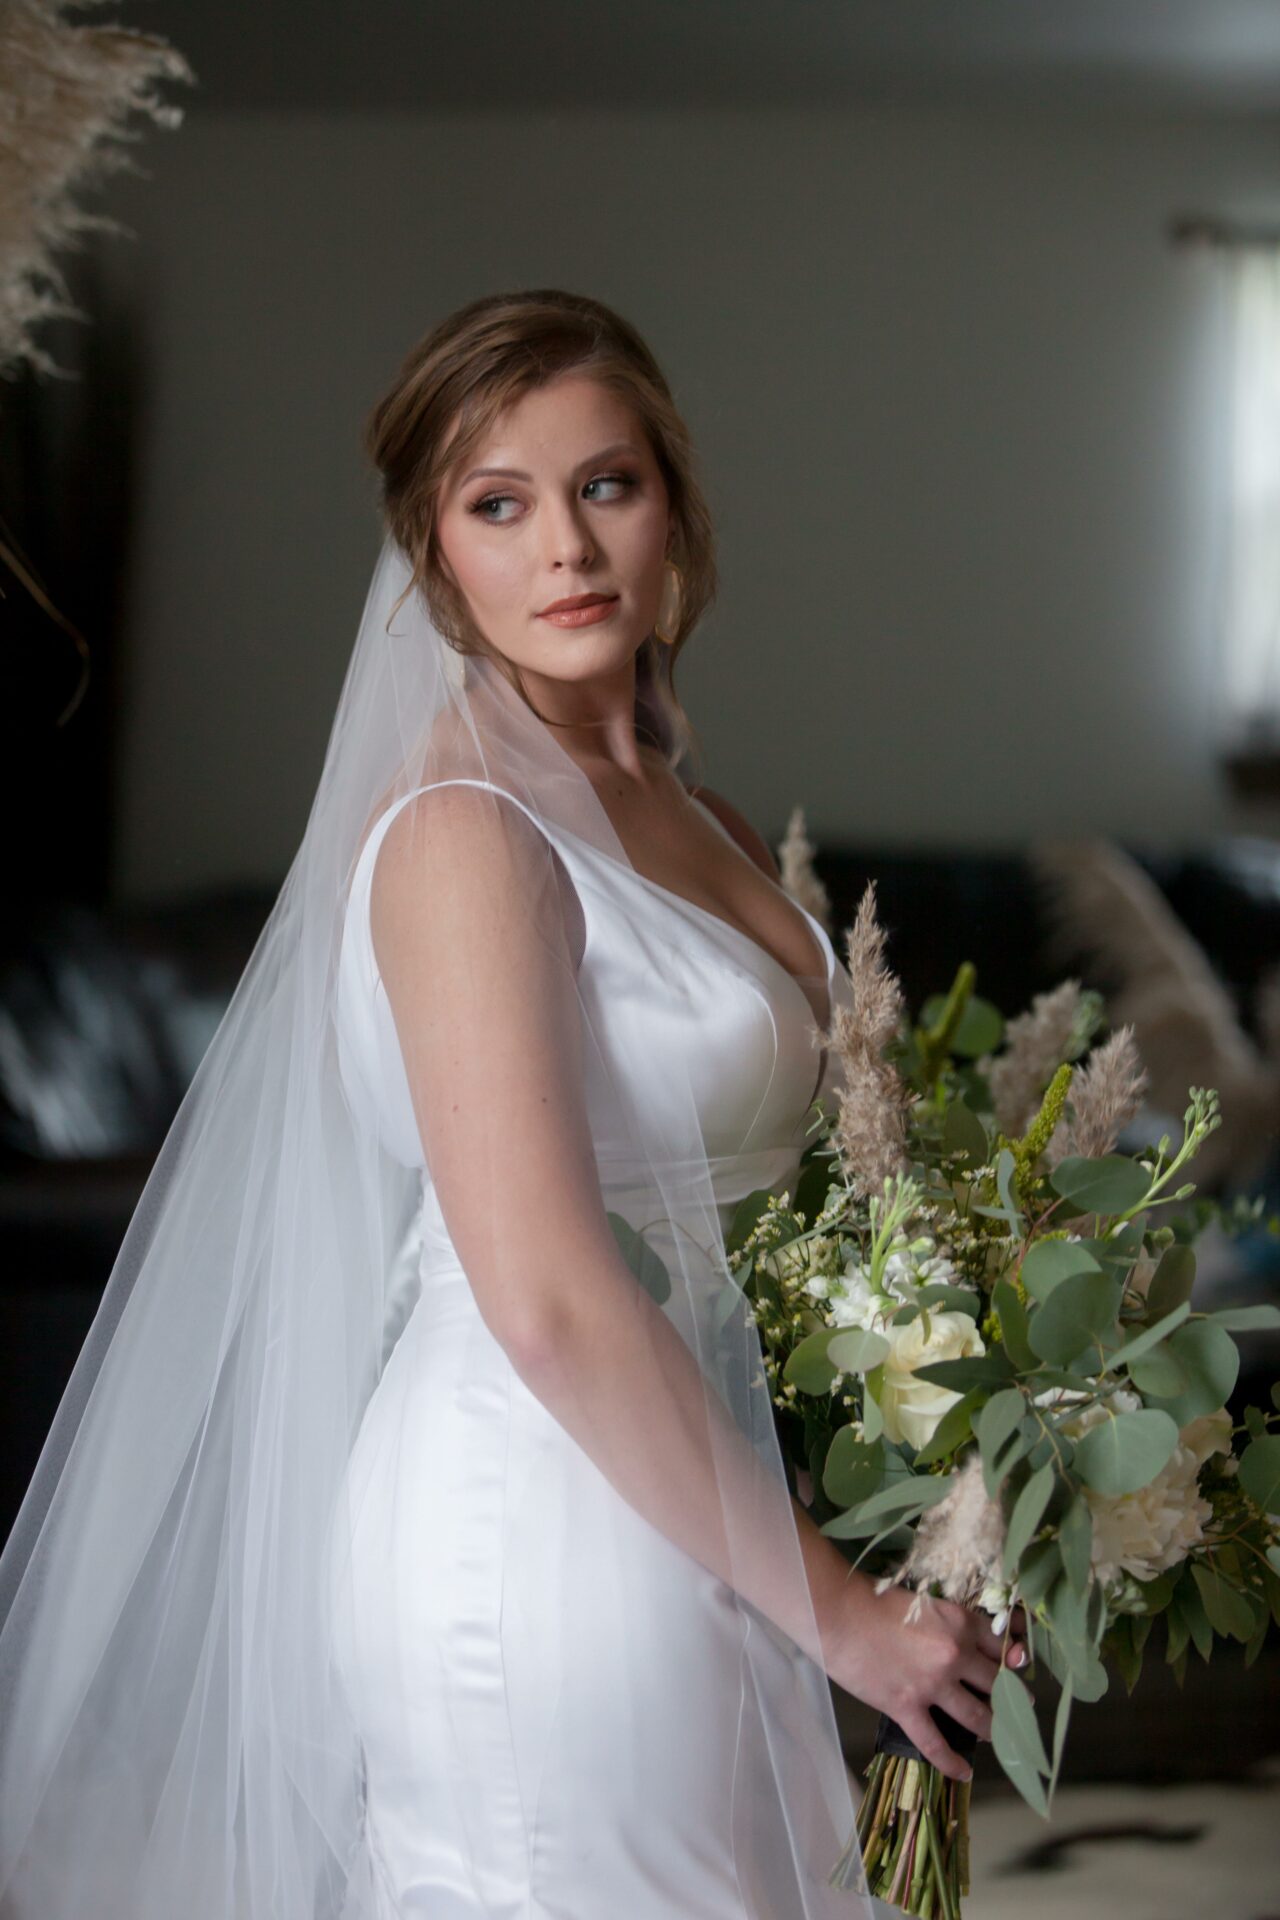 Bridal Portrait Tips for Complete Weddings + Events Tyler Clients